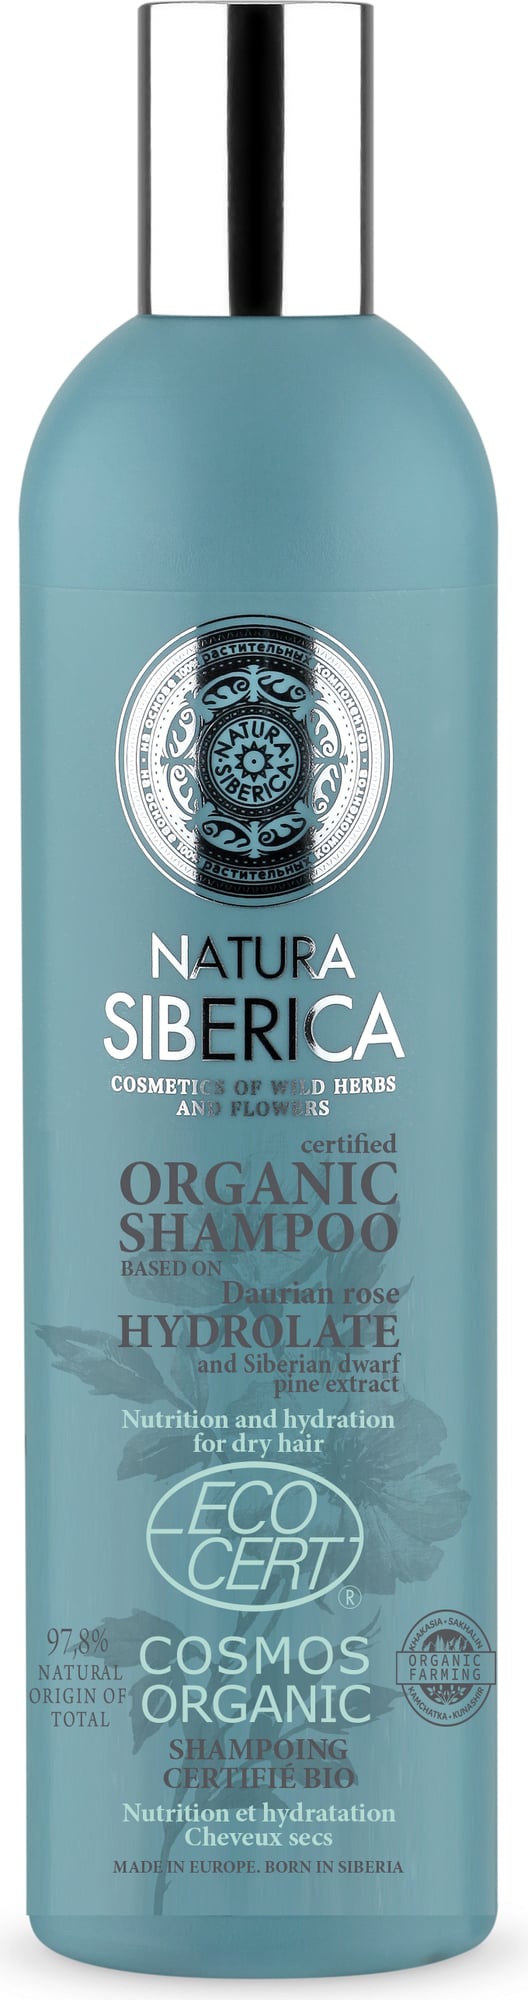 Natura Siberica Nutrition And Hydration Shampoo For Dry Hair